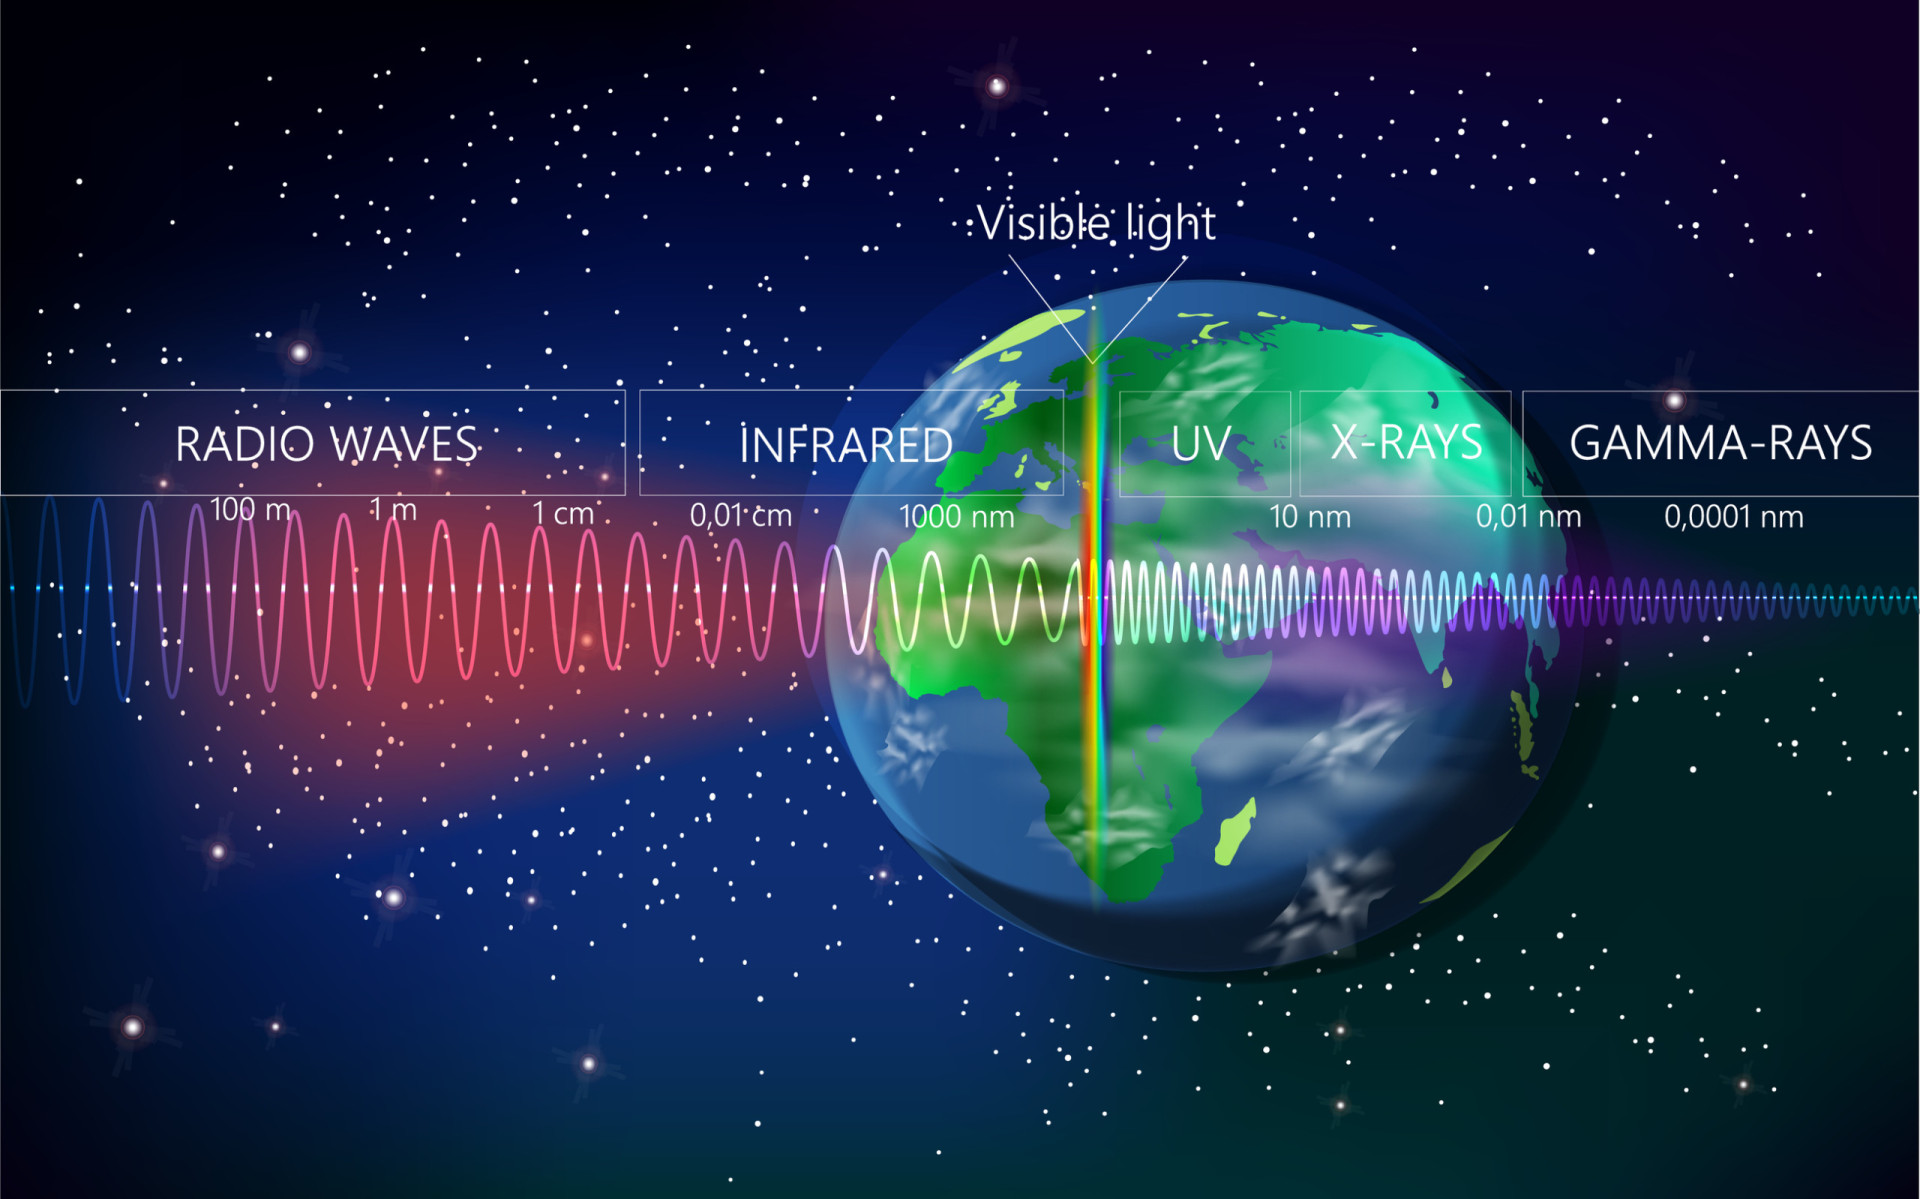 <p>Since the days of Hertz, we have gained a far stronger understanding of the world of electromagnetic waves. The nature and effects of these waves change with the shapes of their wavelengths.</p><p>You may also like:<a href="https://www.starsinsider.com/n/238396?utm_source=msn.com&utm_medium=display&utm_campaign=referral_description&utm_content=550315en-us"> The world's ugliest (but coolest) dogs</a></p>